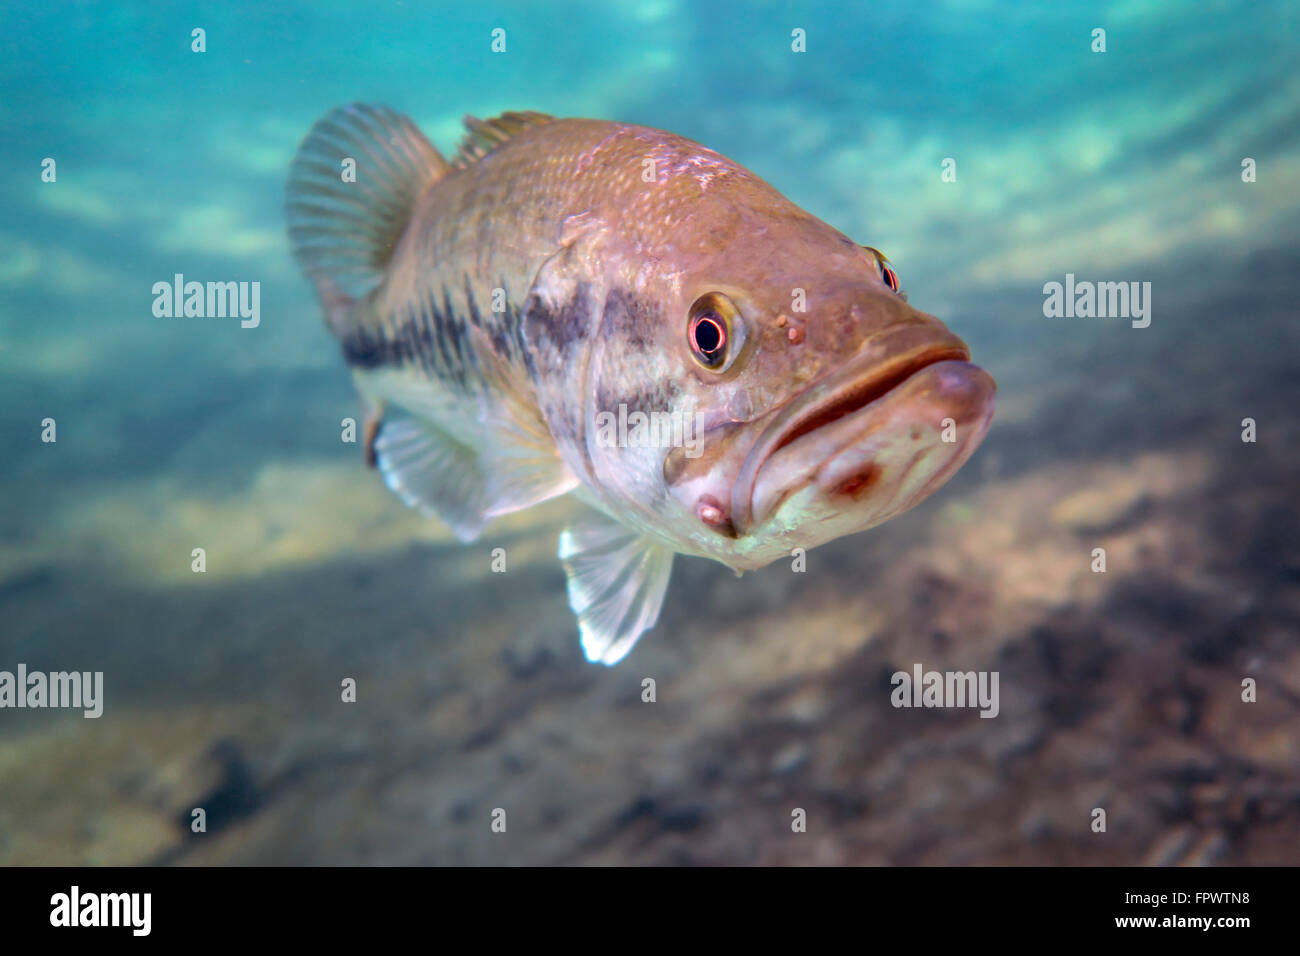 A largemouth bass faces swimming in Ponce de Leon Springs, Florida. Stock Photo